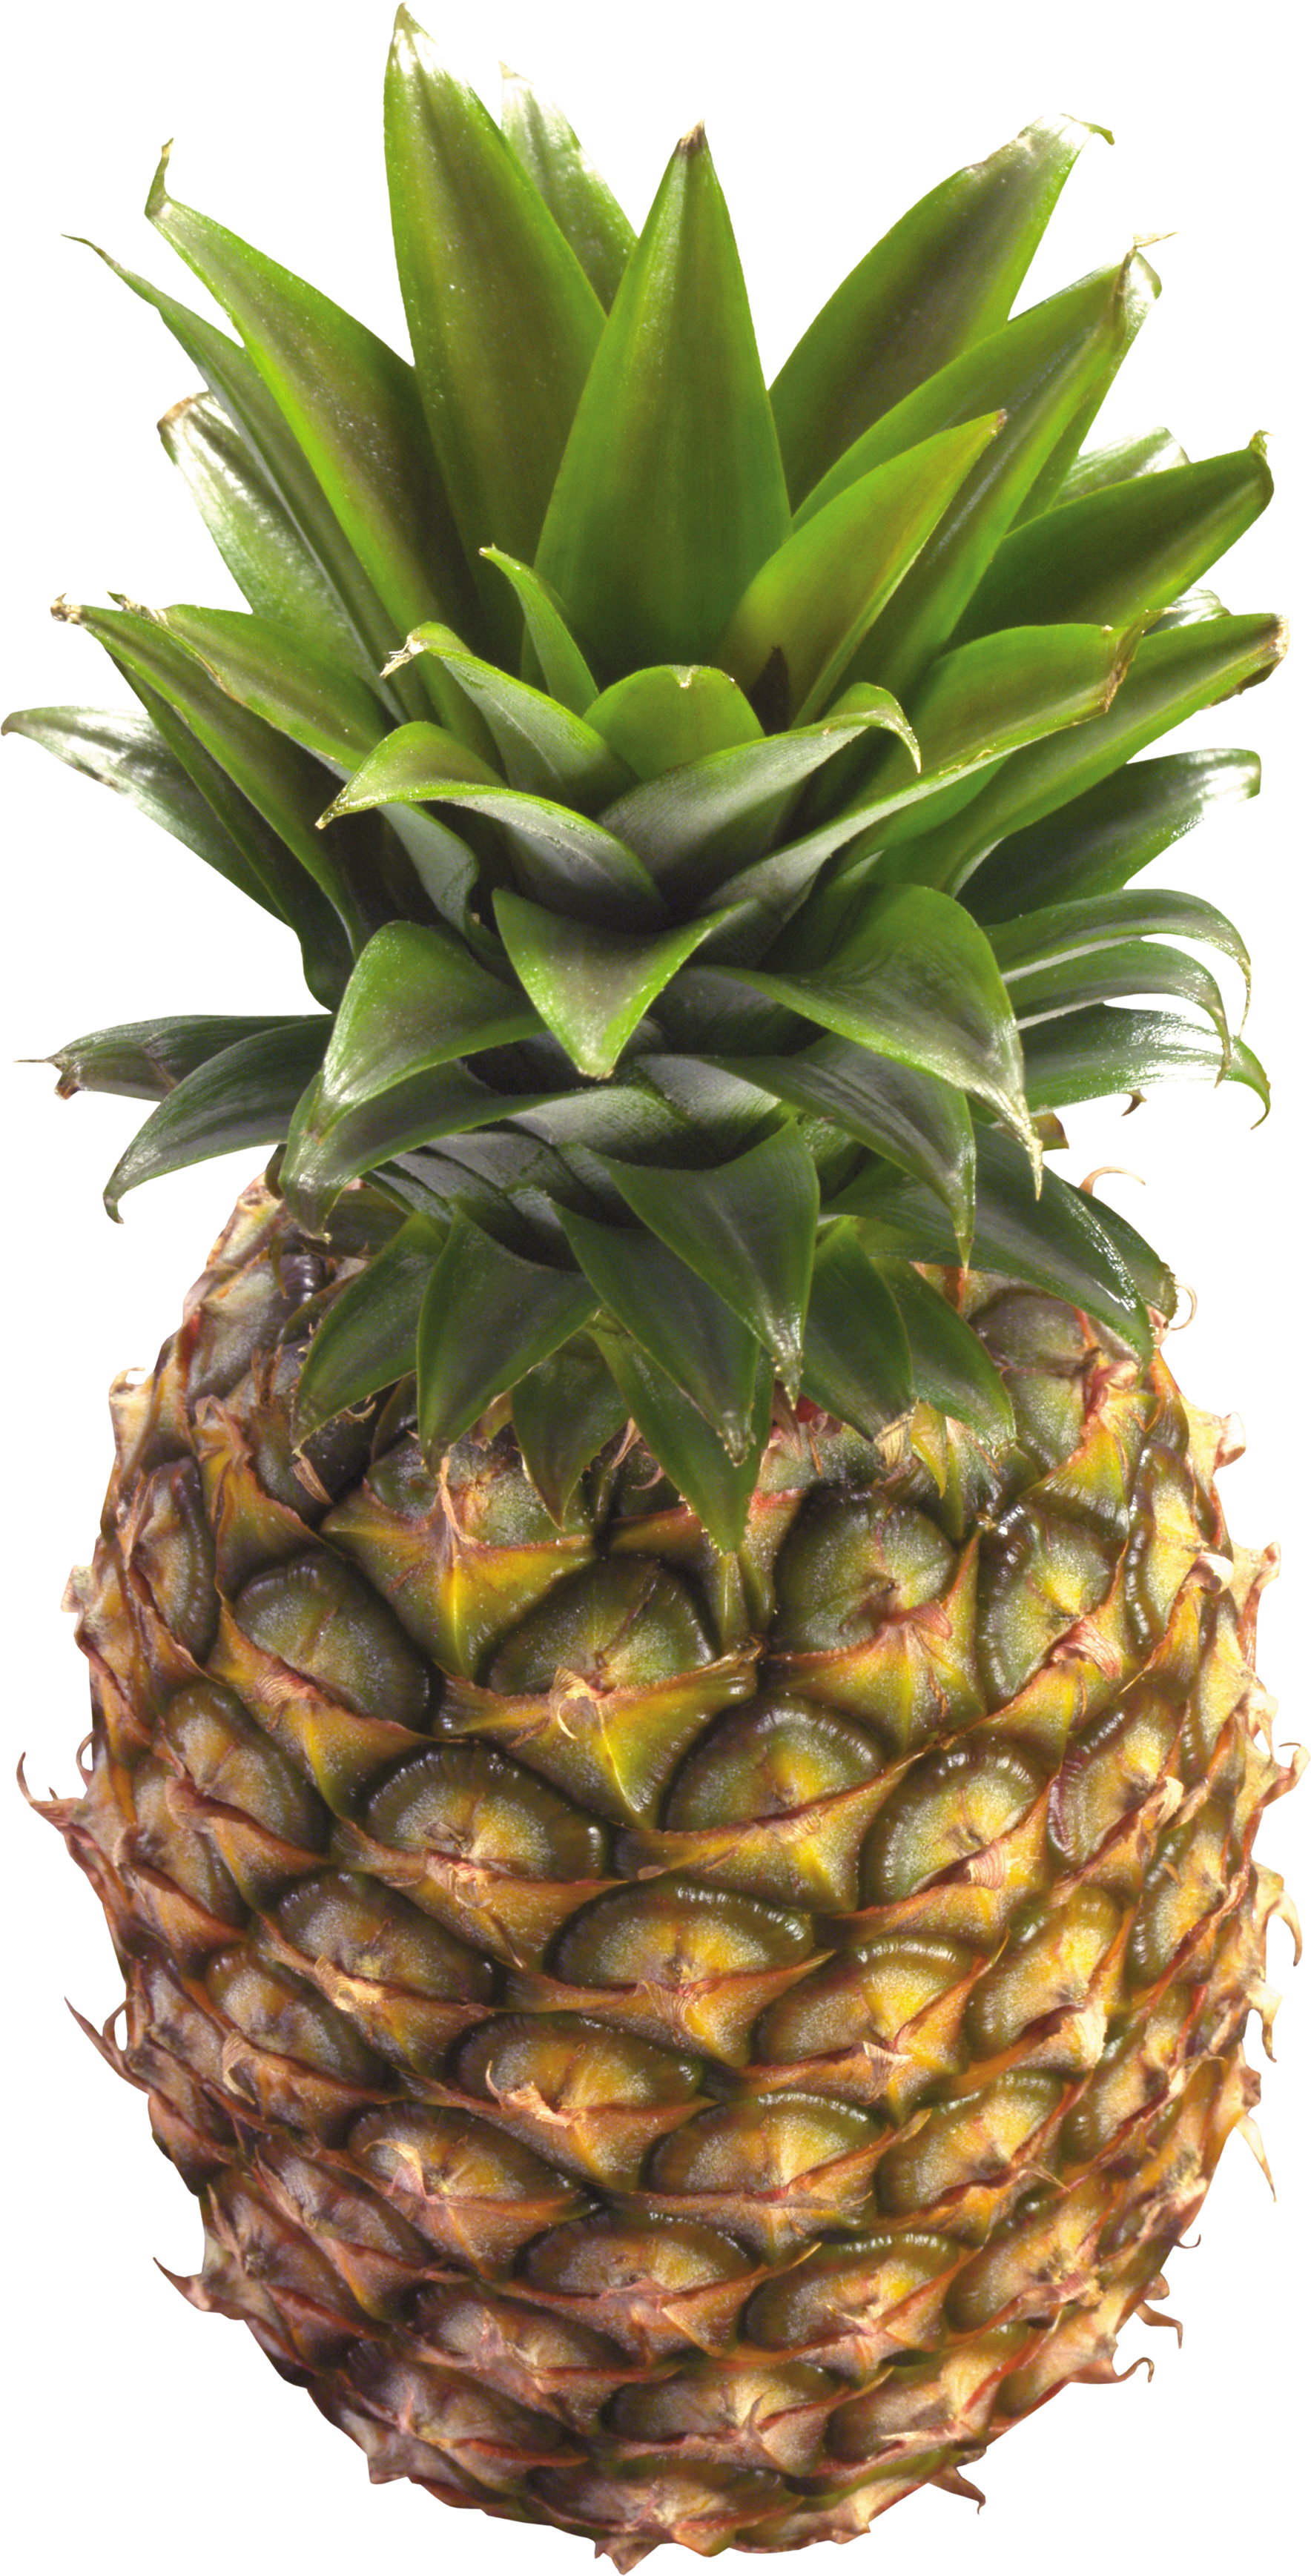 Pineapple Png Image, Free Download - Pineapple, Transparent background PNG HD thumbnail